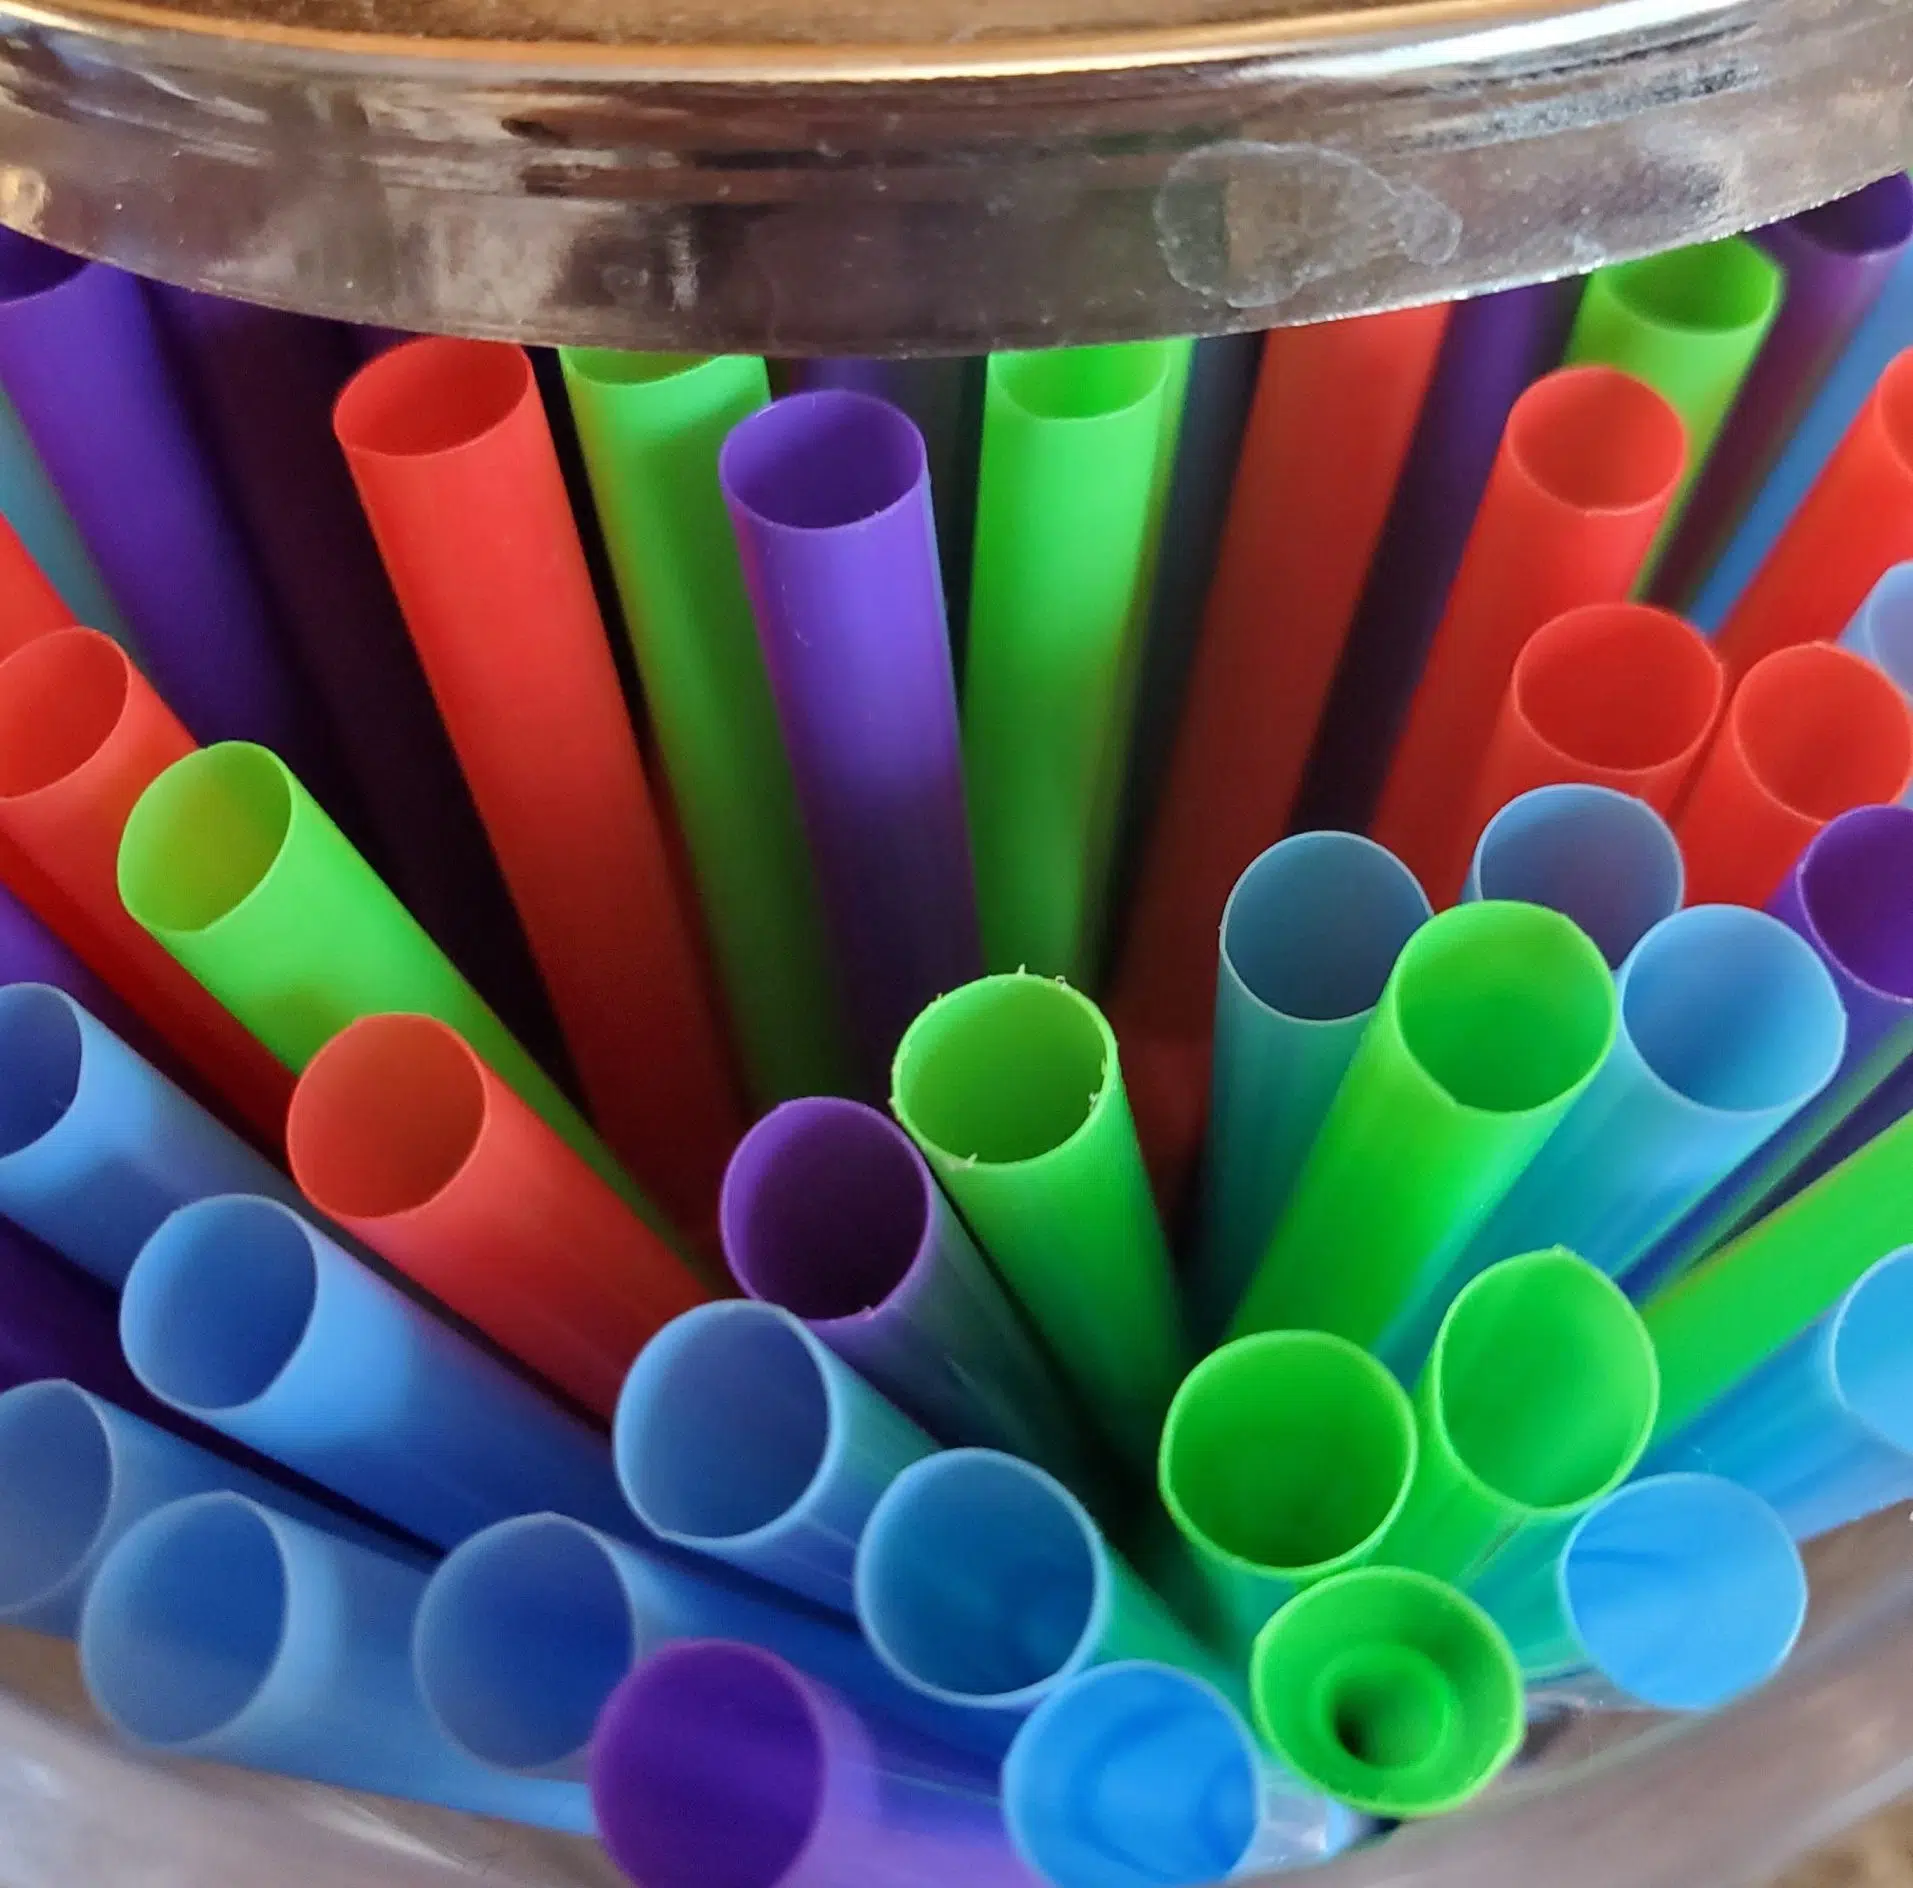 Canada To Ban Plastic Straws Before 2022